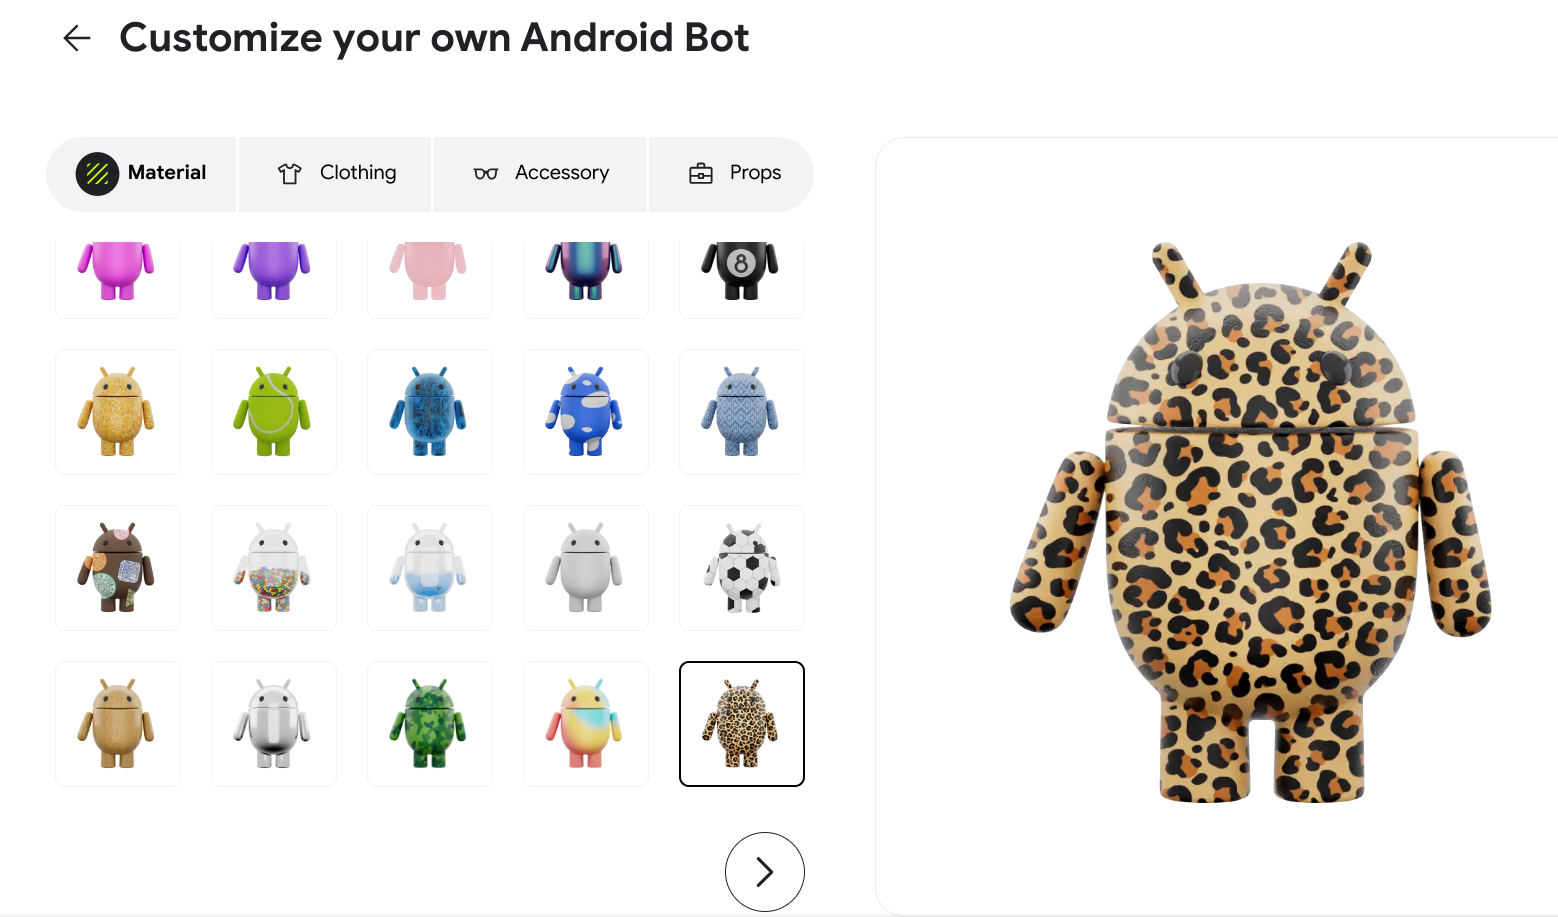 The Android mascot with leopard print skin